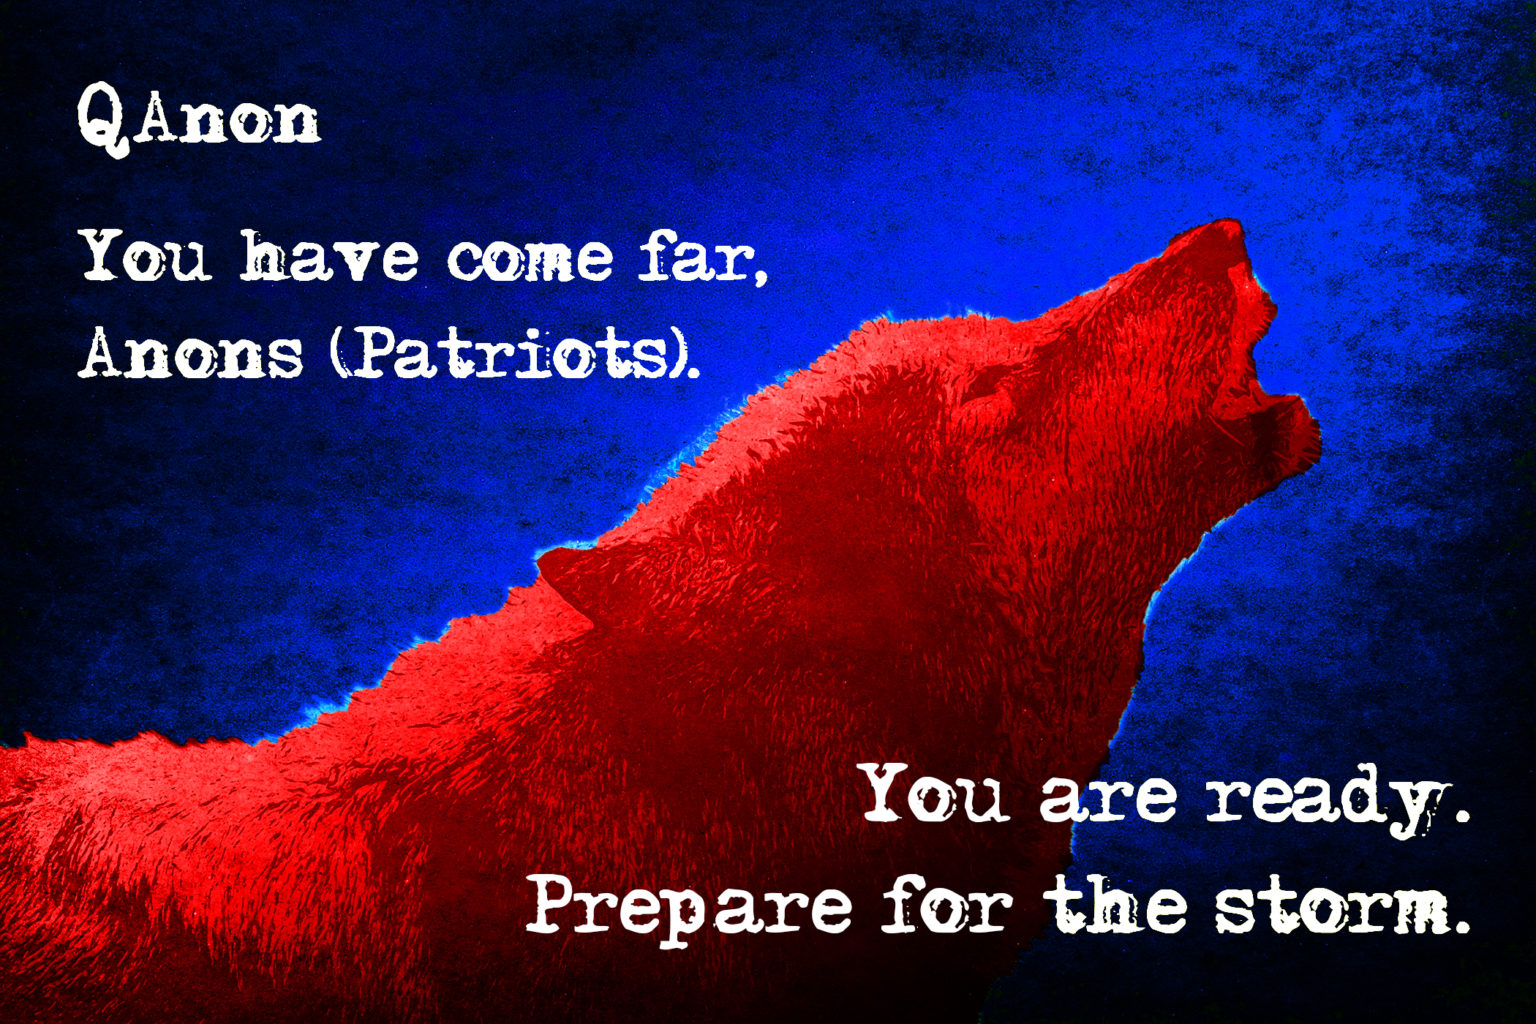 q-anon-wolf-you-are-ready-prepare-for-the-storm-1536x1024.jpg